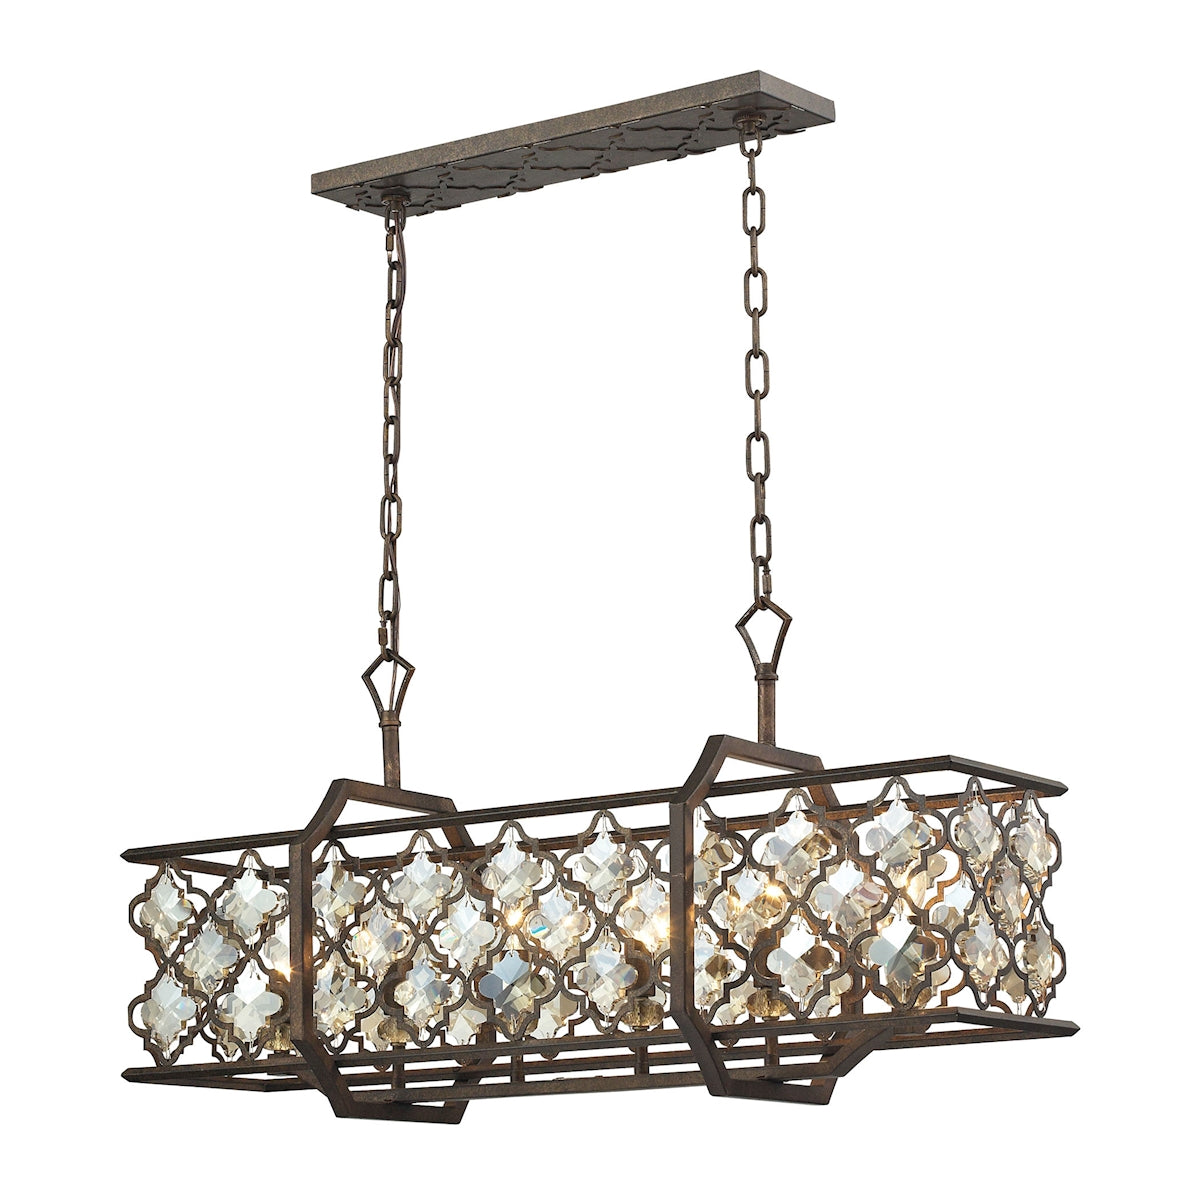 ELK Lighting 31098/6 Armand 6-Light Linear Chandelier in Weathered Bronze with Amber Teak Crystals and Metal Shade